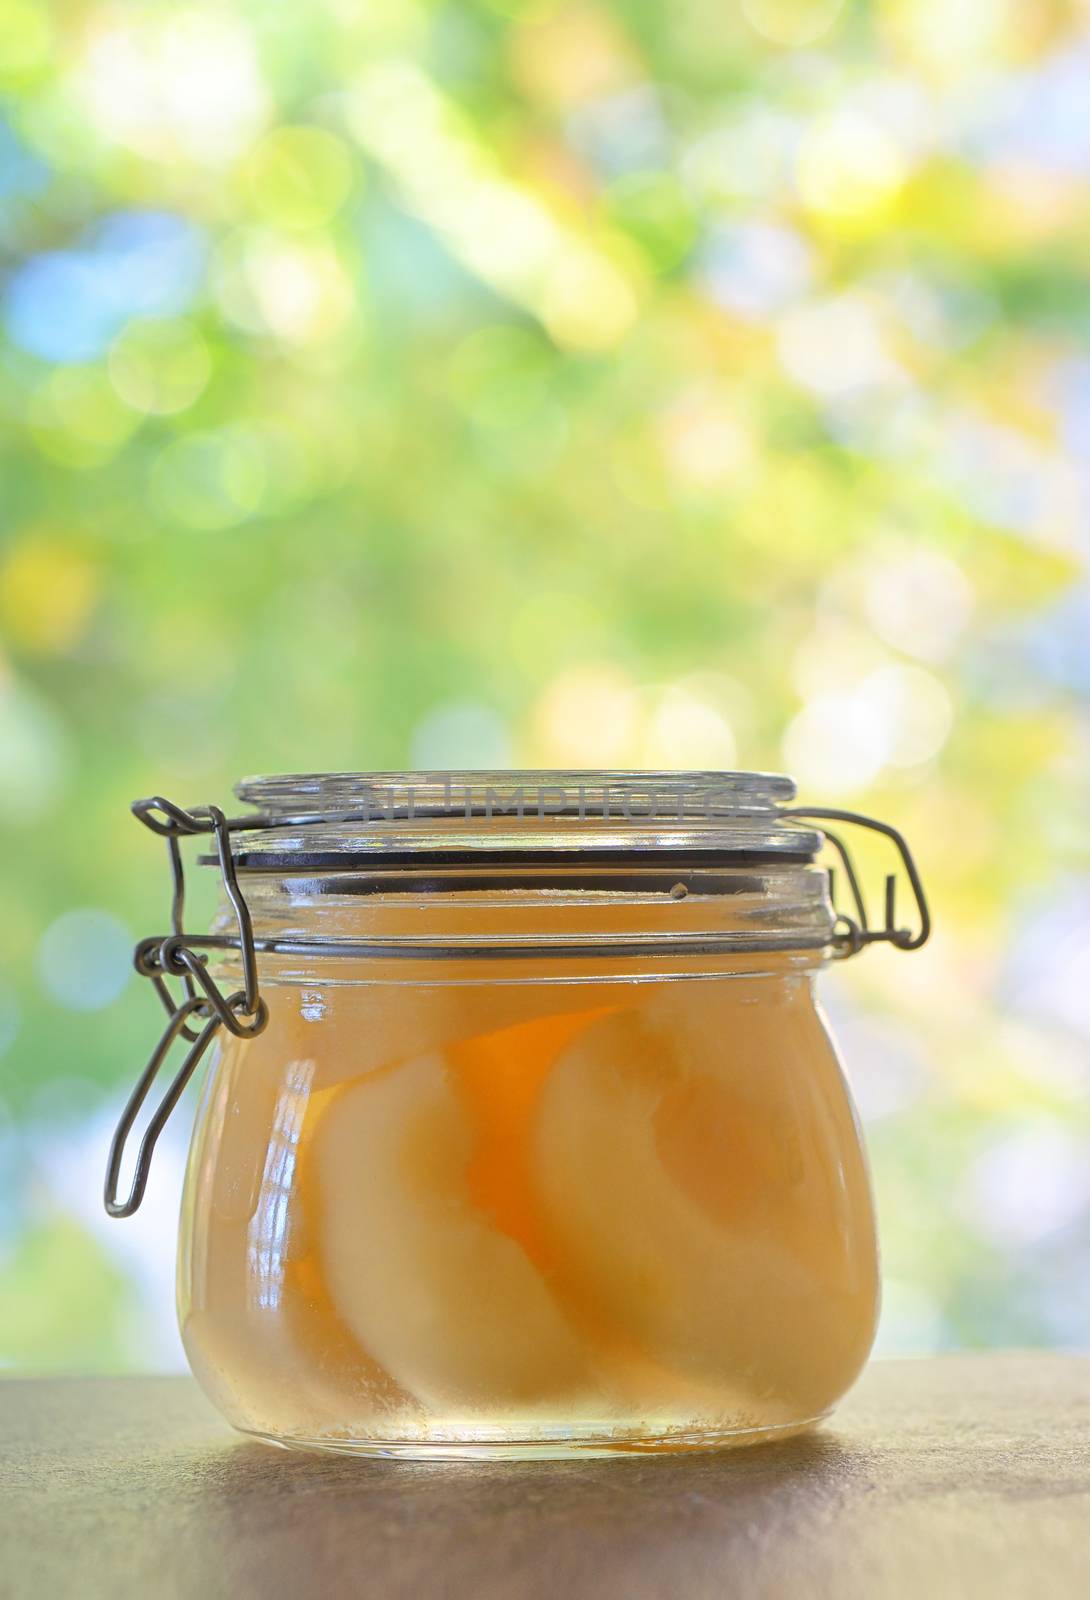 Half pears compote by mady70